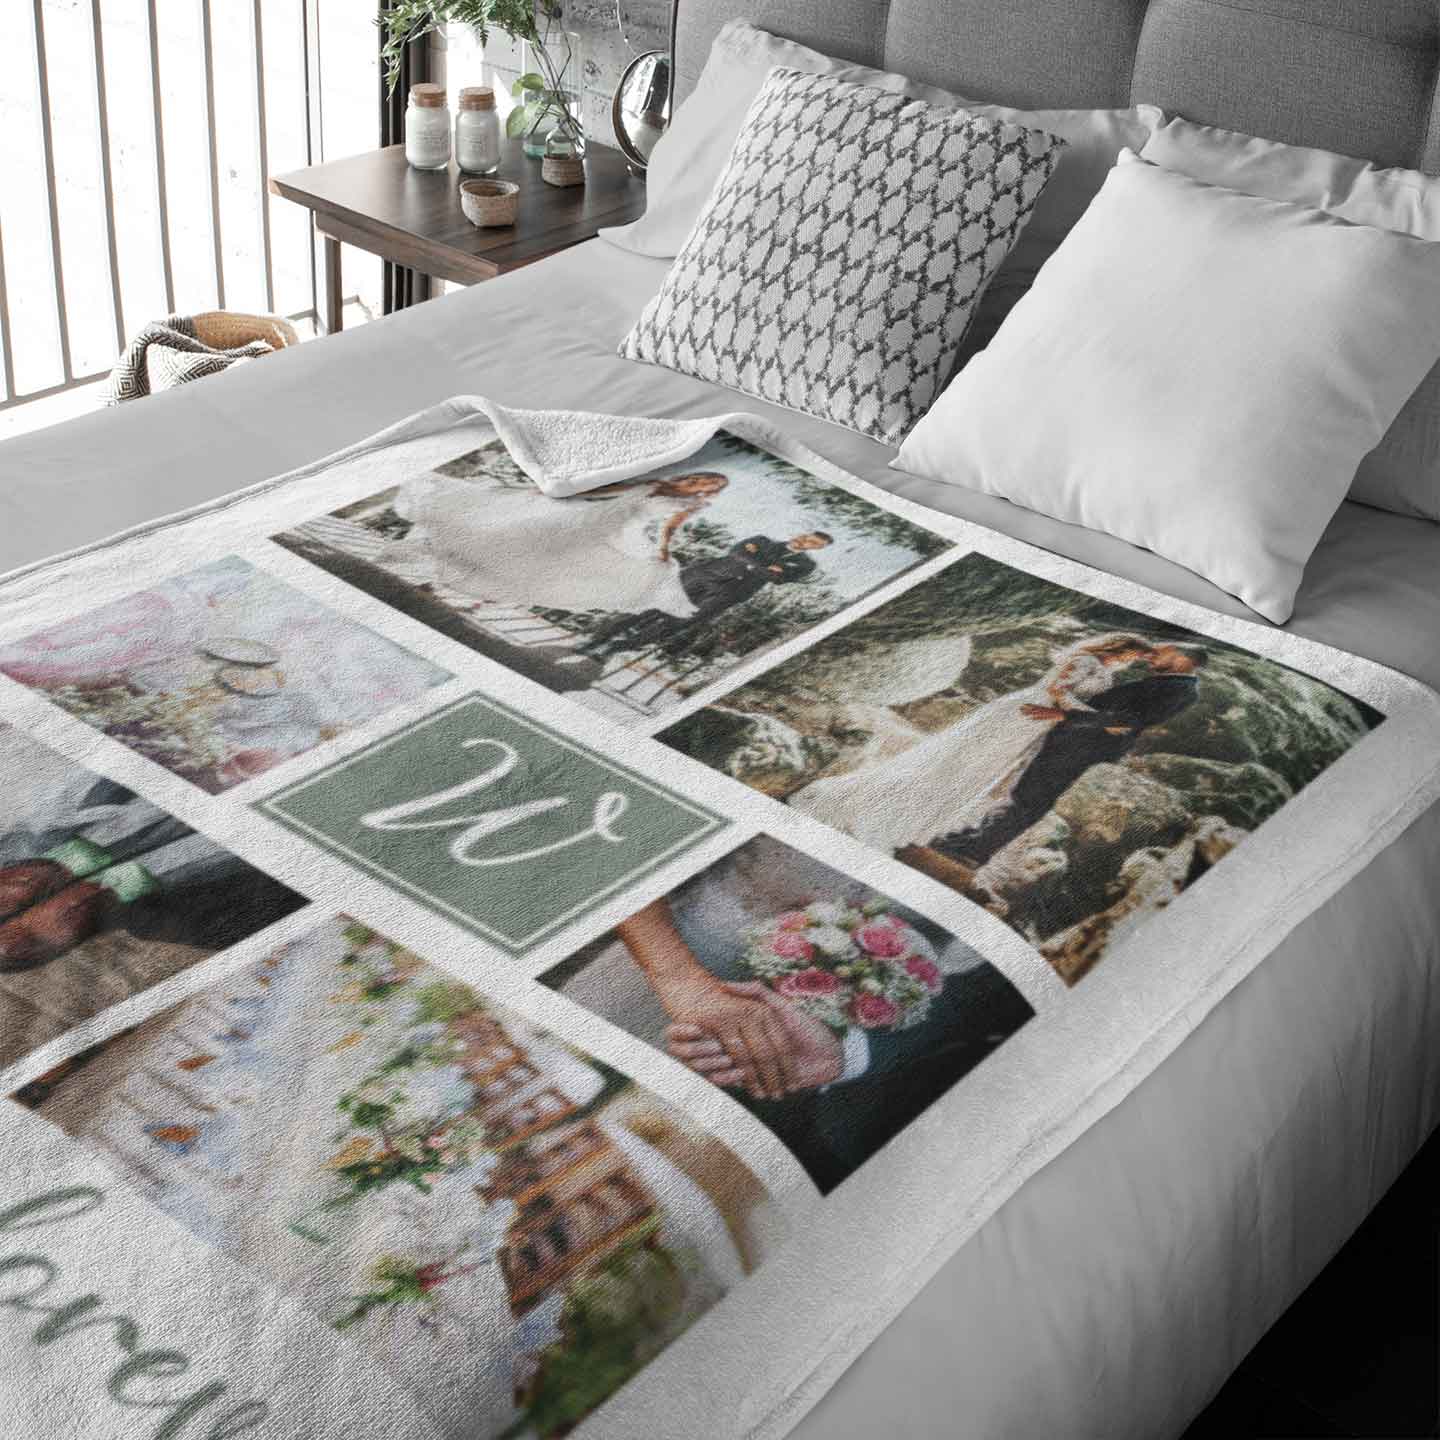 Always and Forever Photo Collage Personalised Blanket